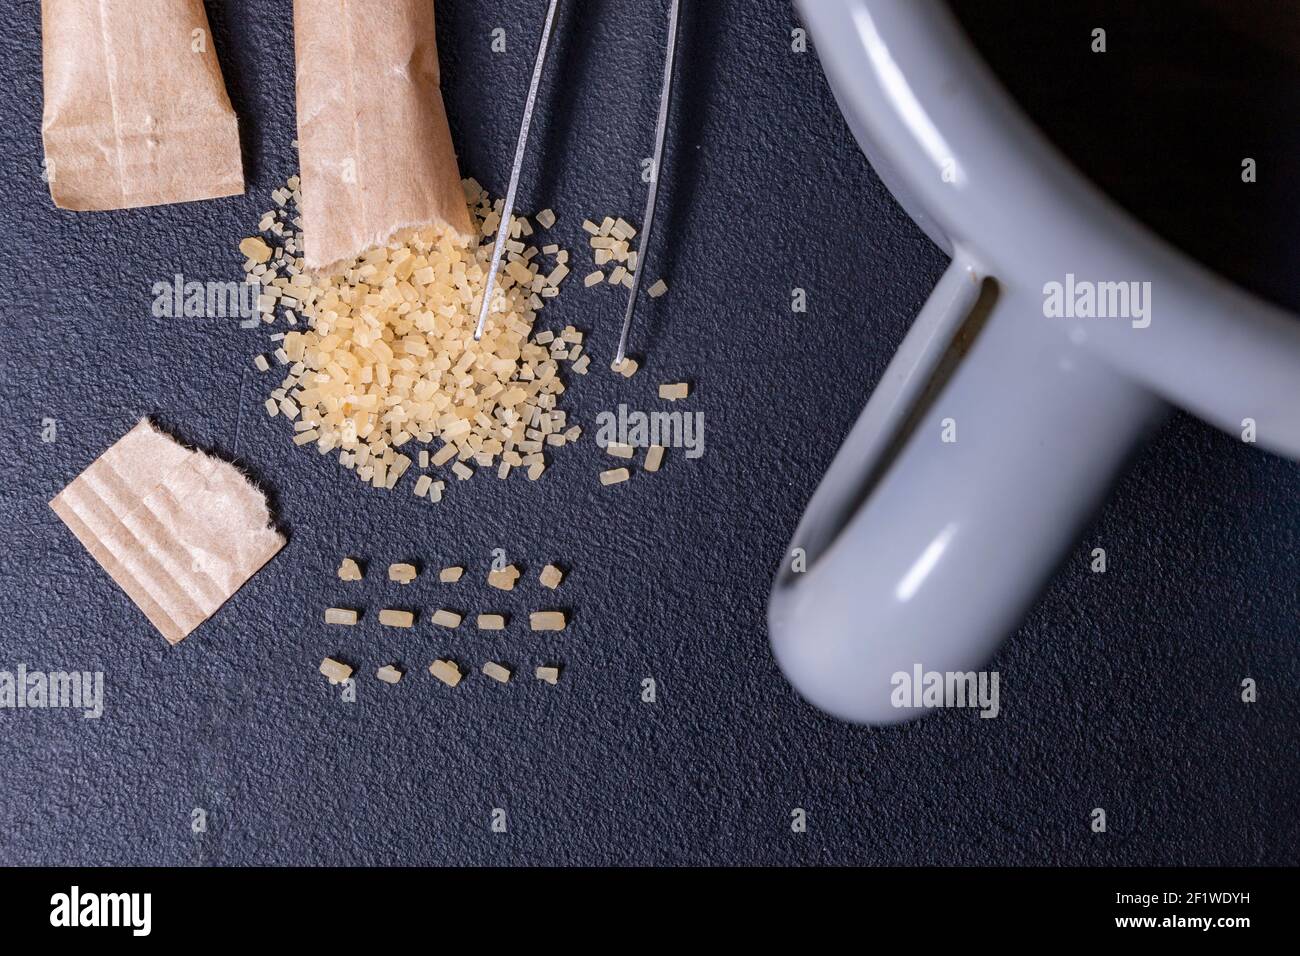 Sweetening tea with cane sugar. Arranged sugar grains on the table. Dark background. Stock Photo